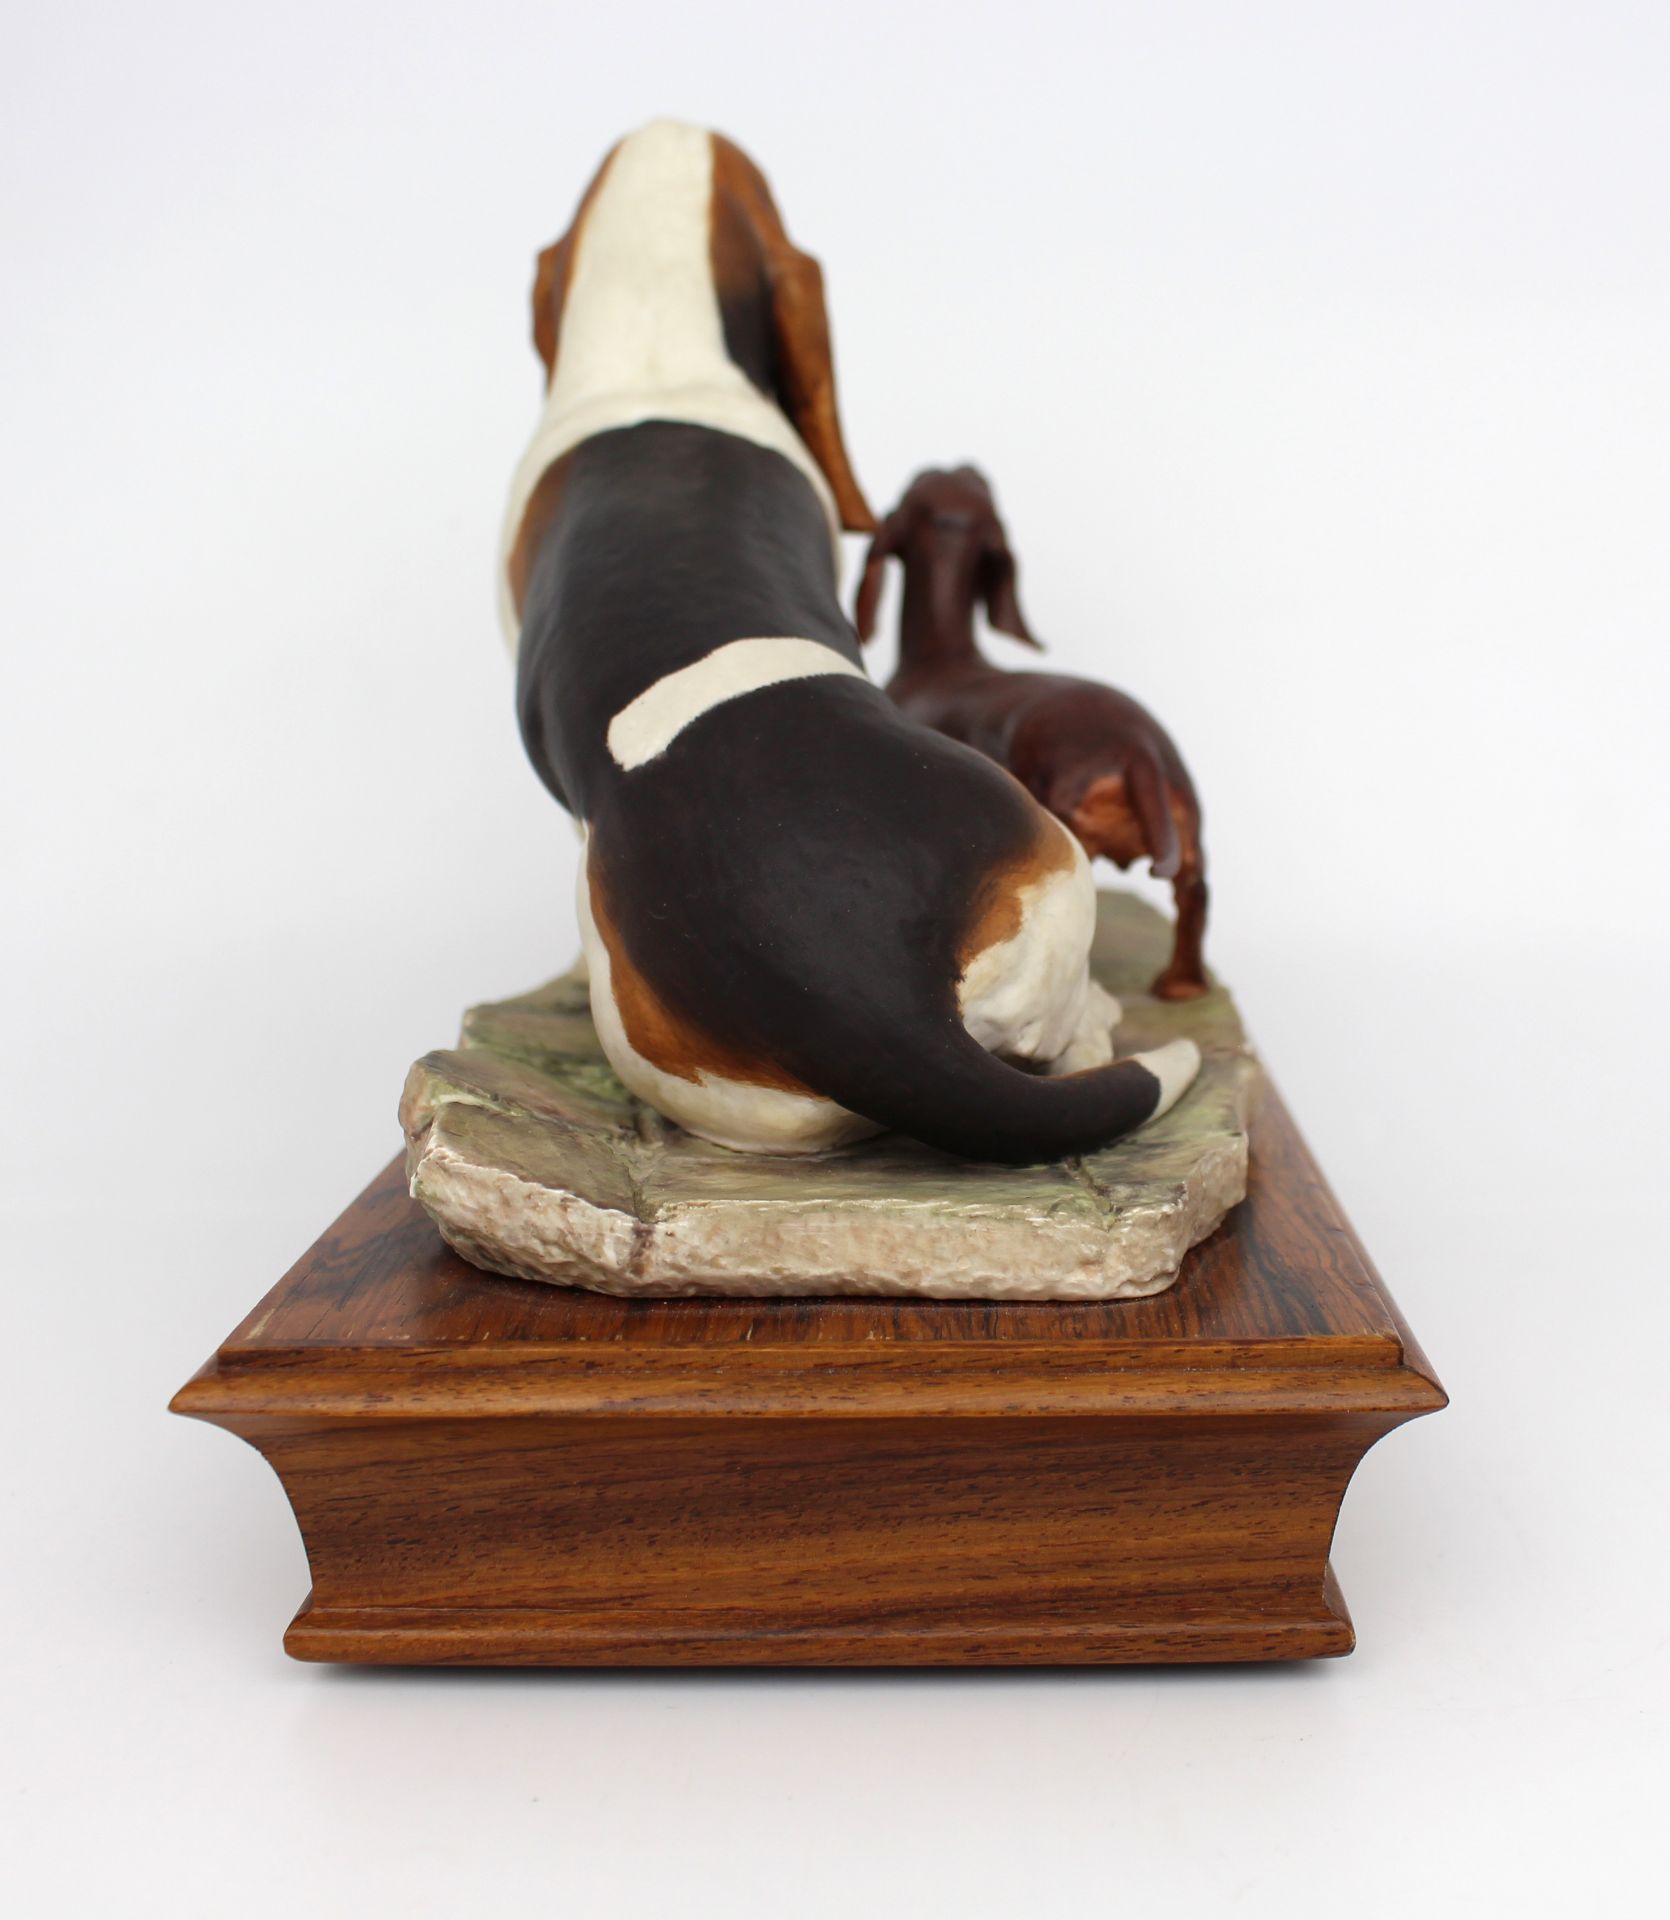 Albany Basset & Dachshund Sculpture - Image 3 of 6